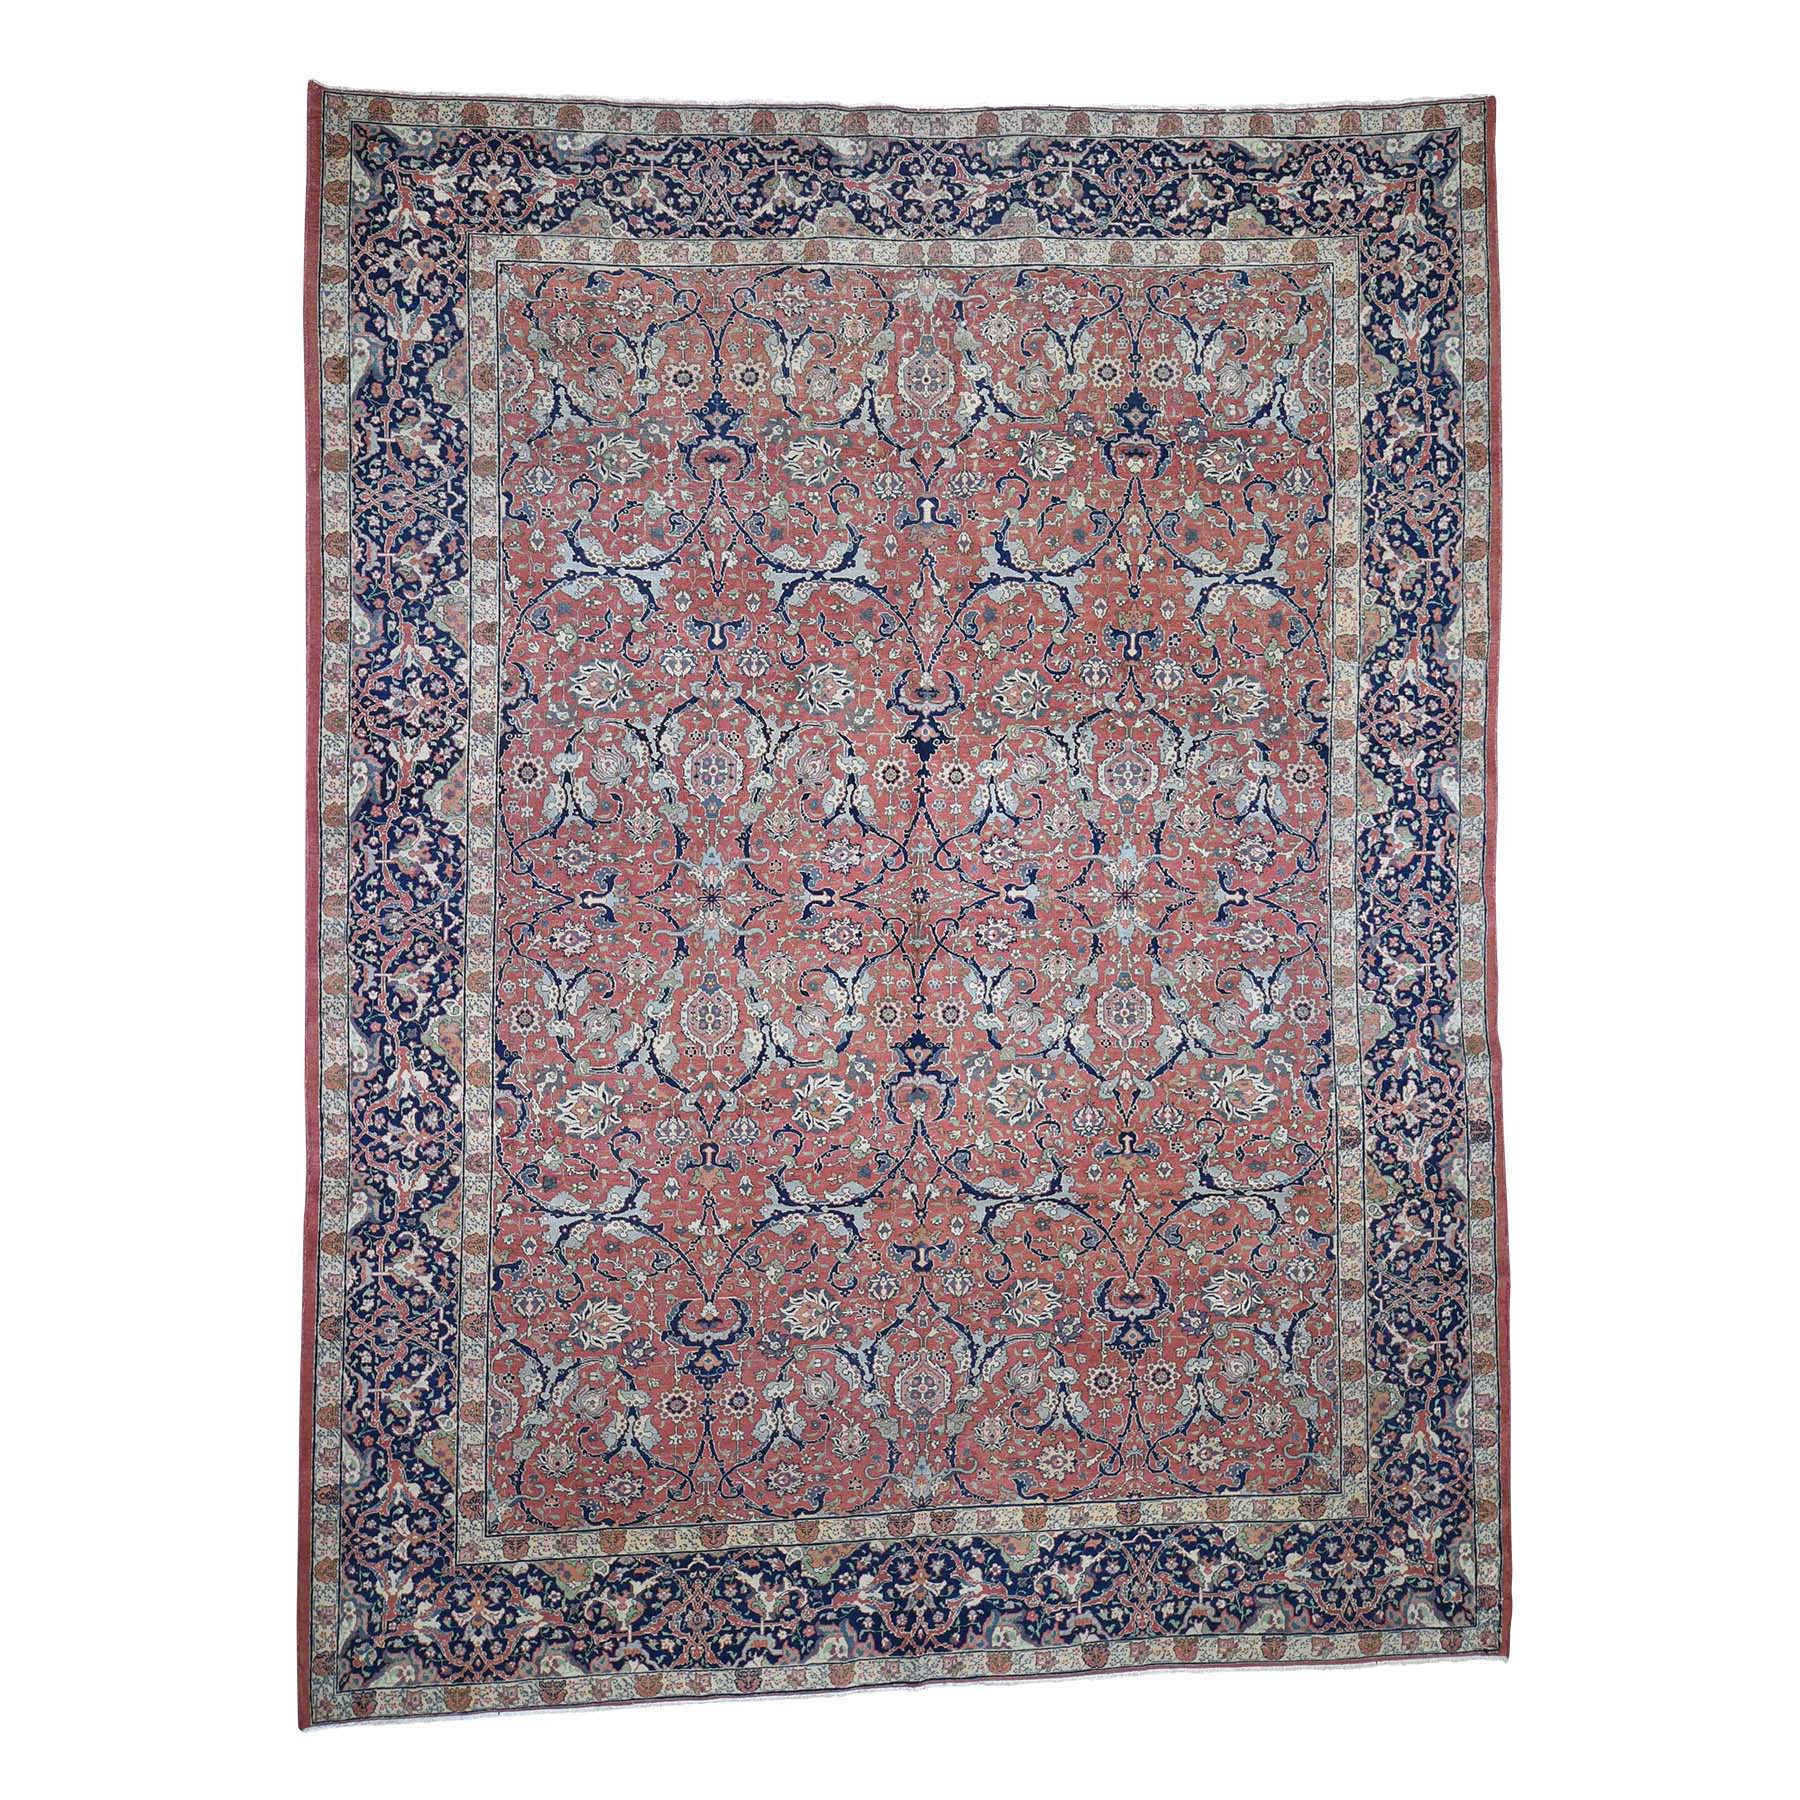 8'4"x11' Antique Persian Tabriz Pure Wool Good Condition Some Wear Hand Woven Oriental Rug 